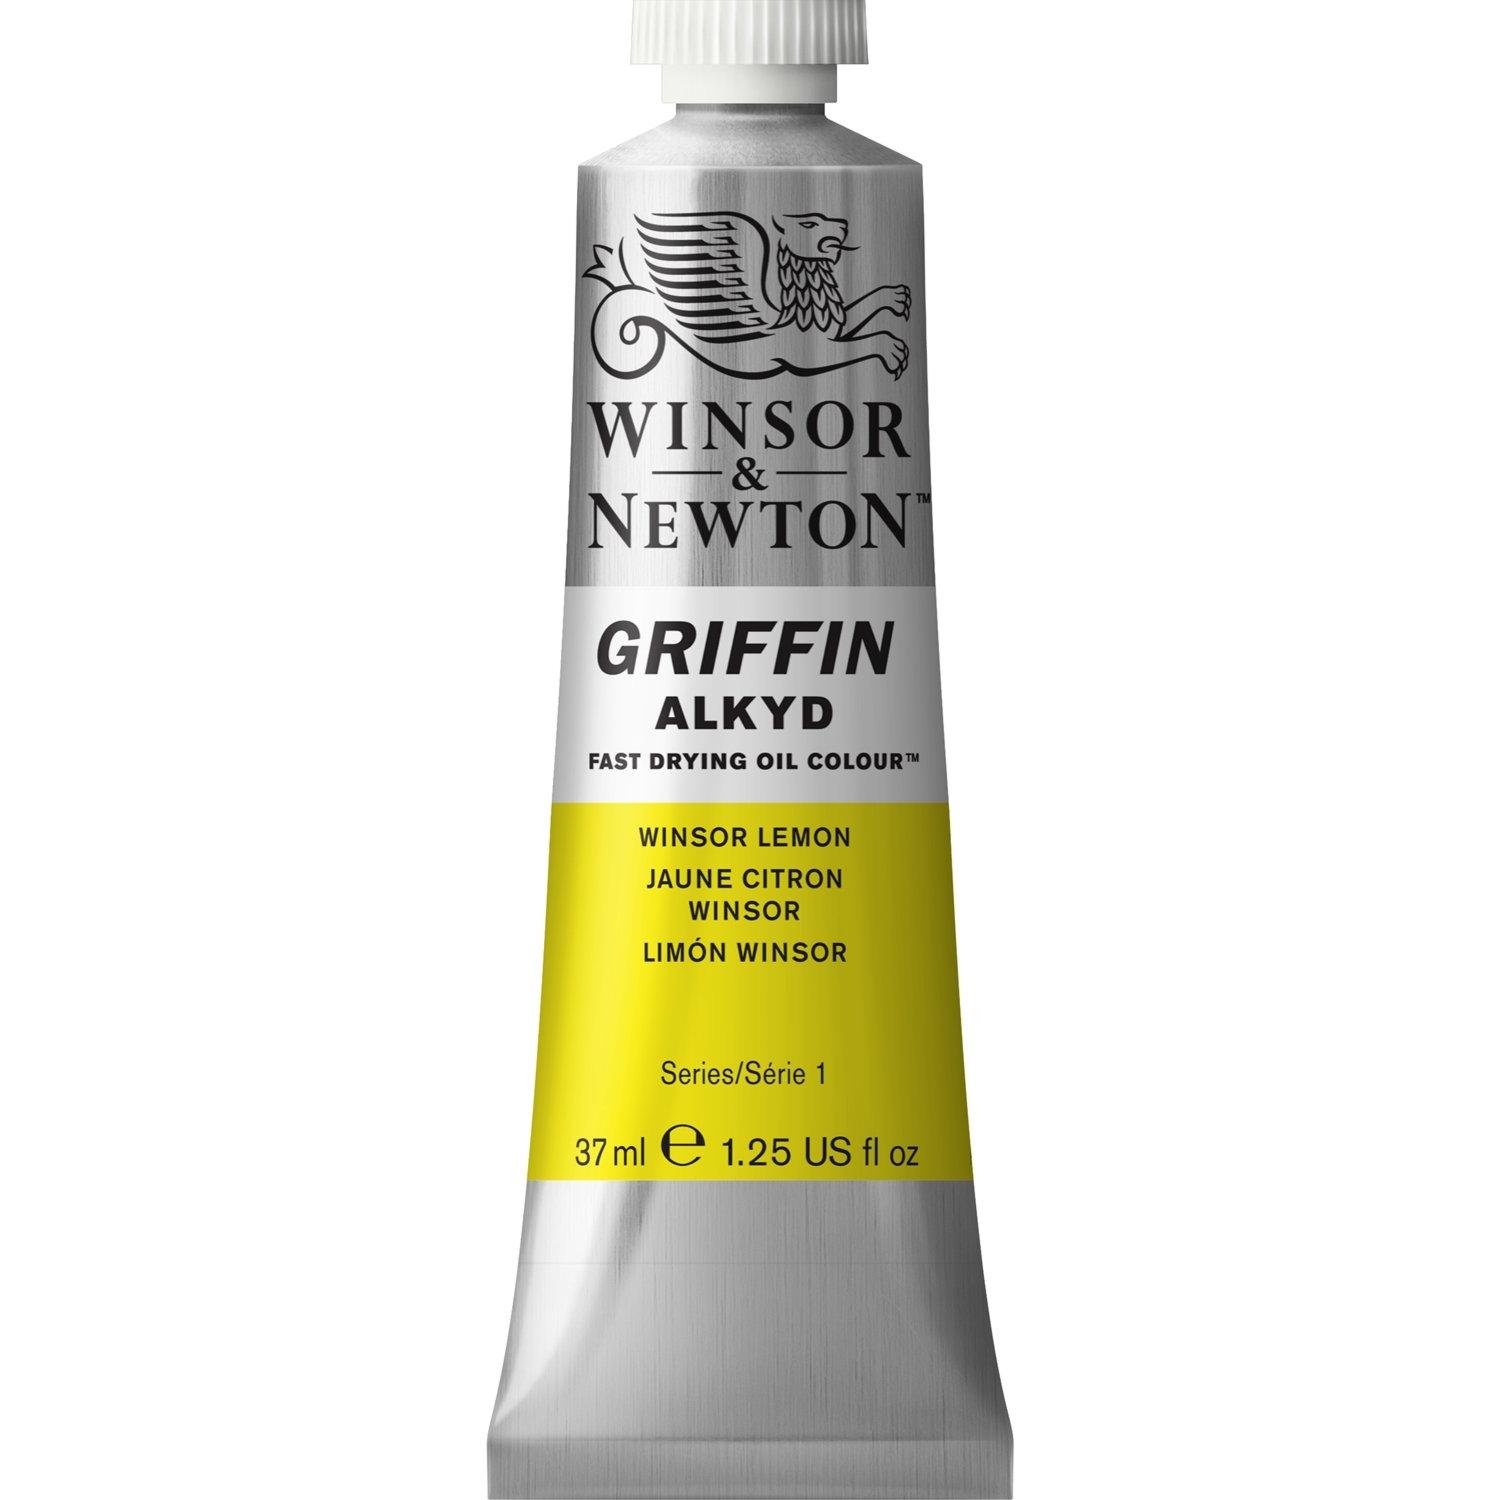 Winsor and Newton Griffin Alkyd Oil Colour - Winsor Lemon Image 1